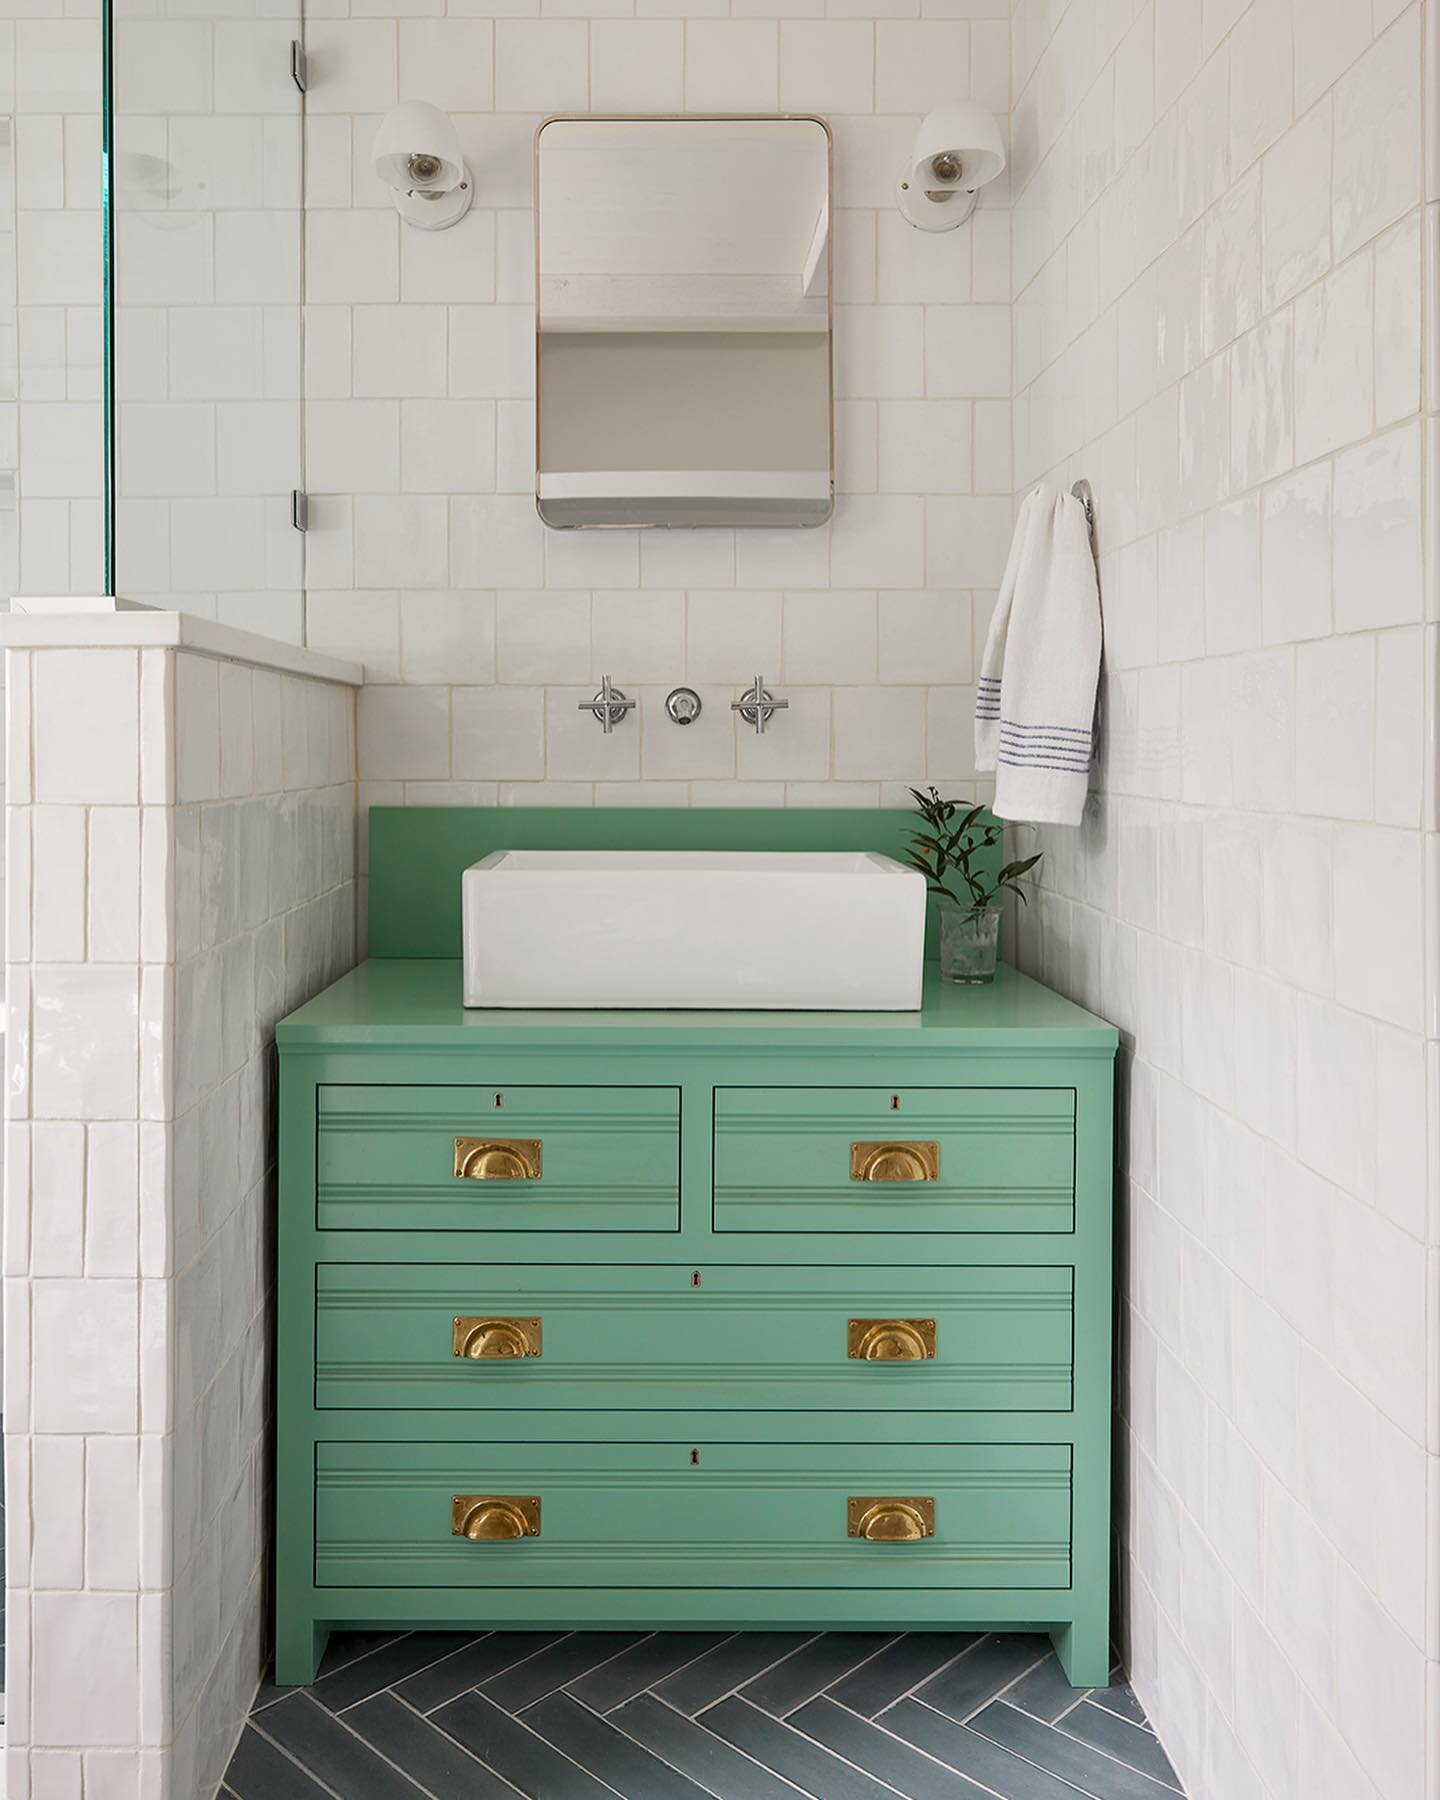 It&rsquo;s a foggy, stormy morning, but feeling a dose of spring in this color palette from a favorite bath in our Kennebunkport project. The custom vanity was inspired by an antique precedent, complete with salvaged escutcheons and painted with @far